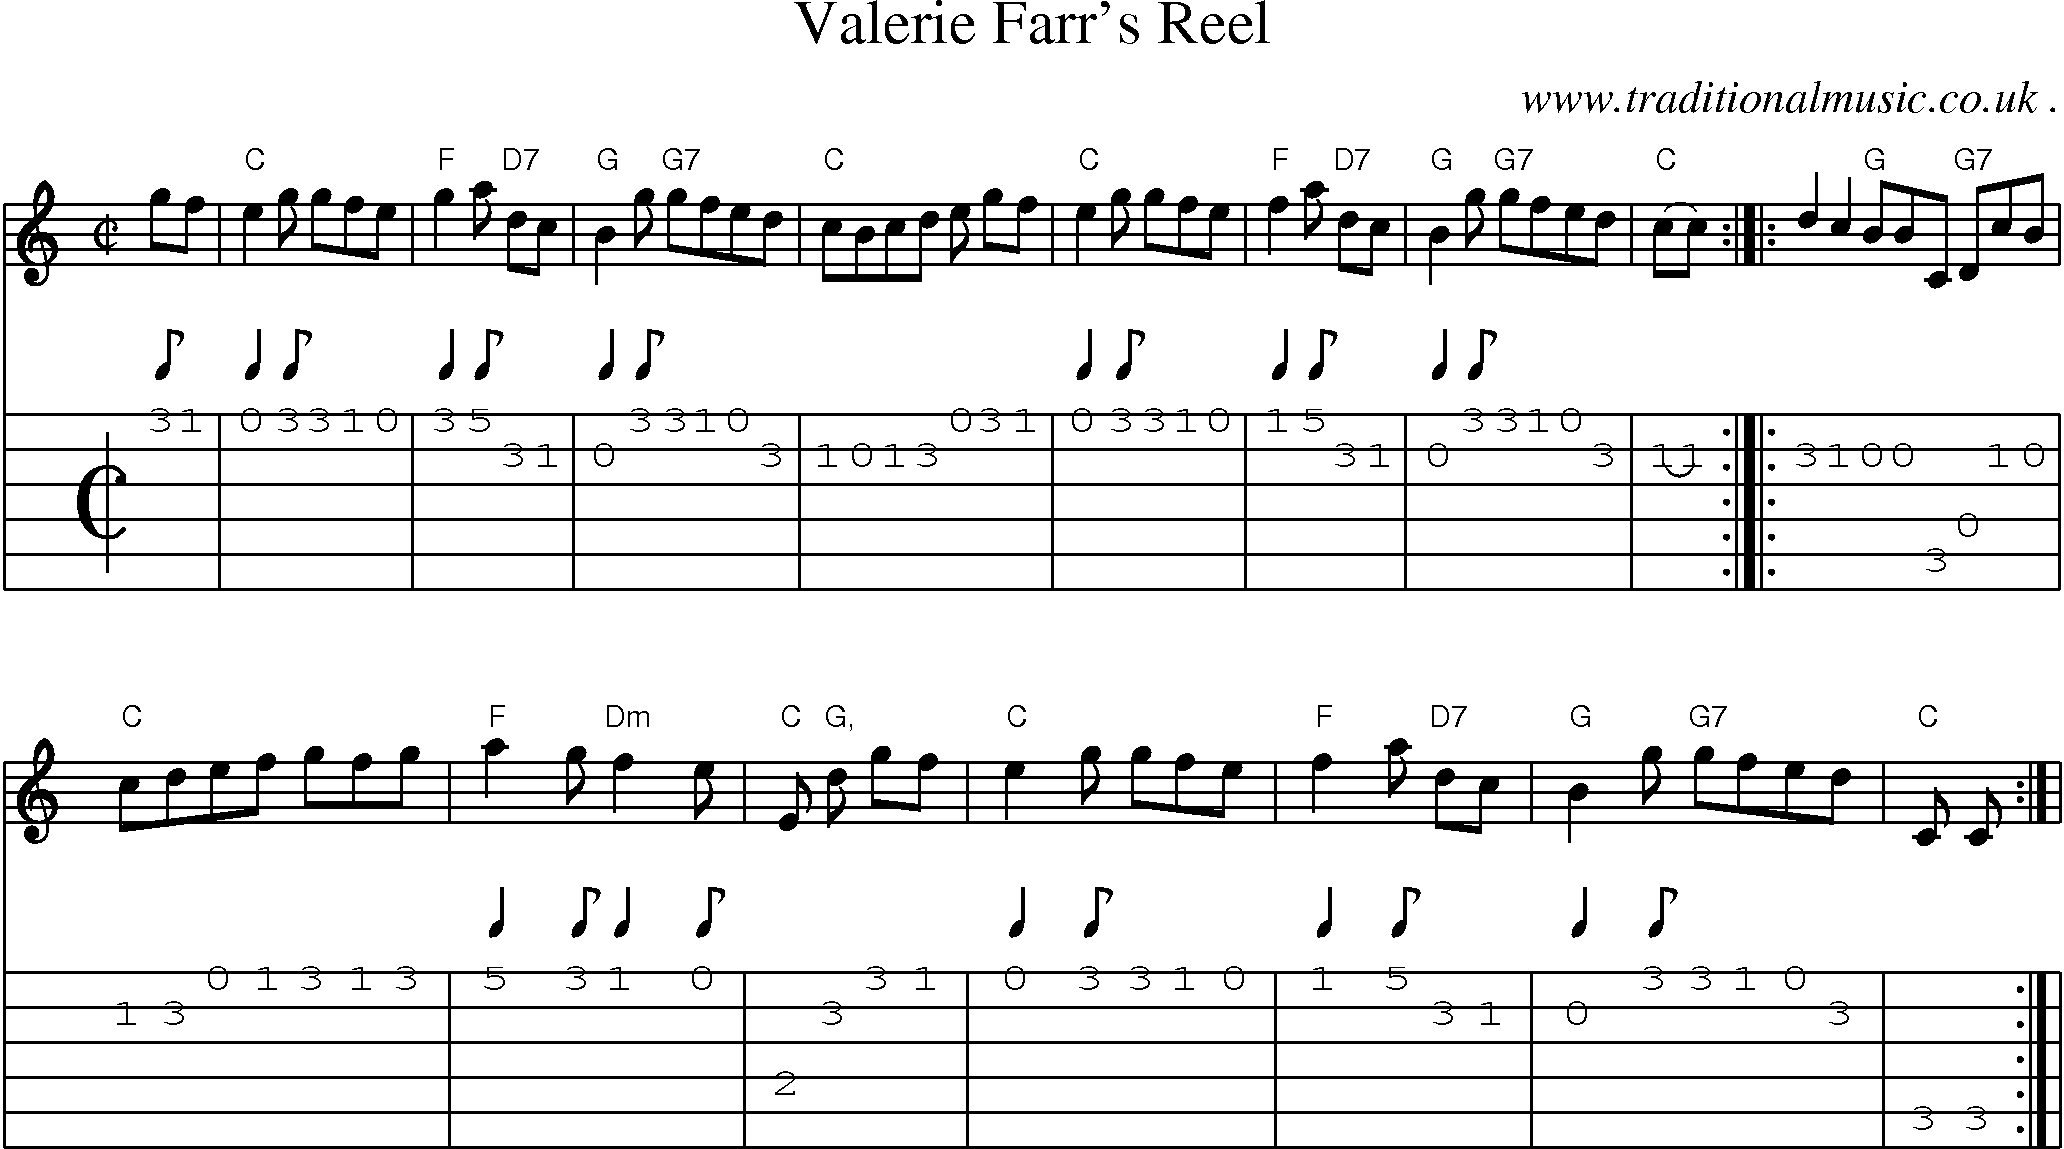 Sheet-music  score, Chords and Guitar Tabs for Valerie Farrs Reel